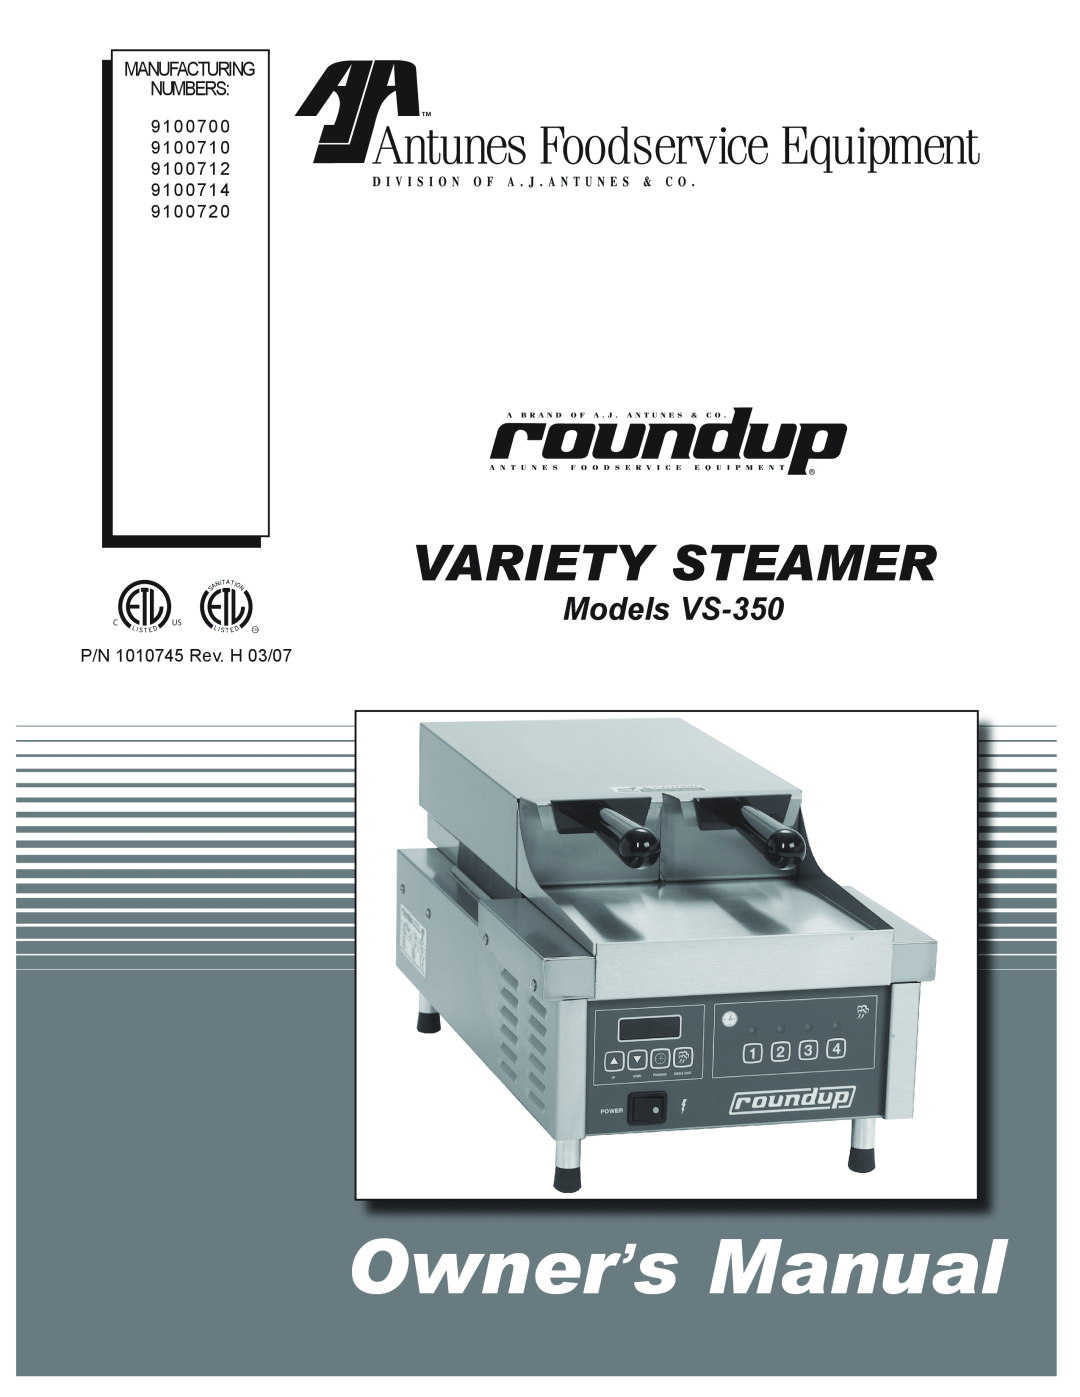 Antunes, AJ owner manual Variety Steamer, Models VS-350, Manufacturing Numbers, I S Ted, It A T 